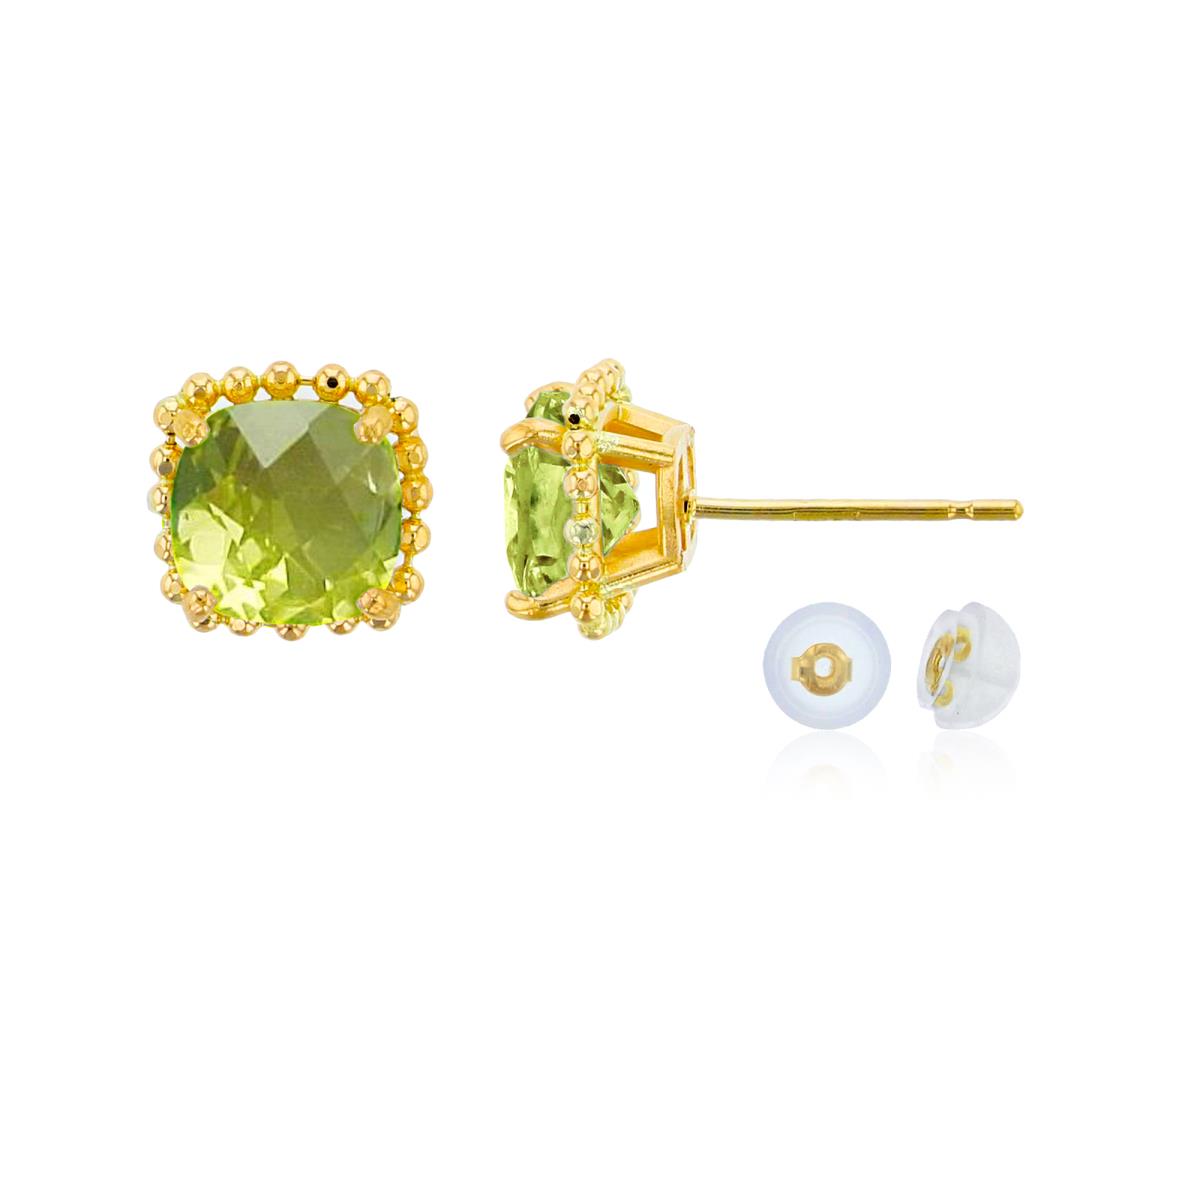 14K Yellow Gold 6x6mm Cushion Cut Apple Quartz Bead Frame Stud Earring with Silicone Back